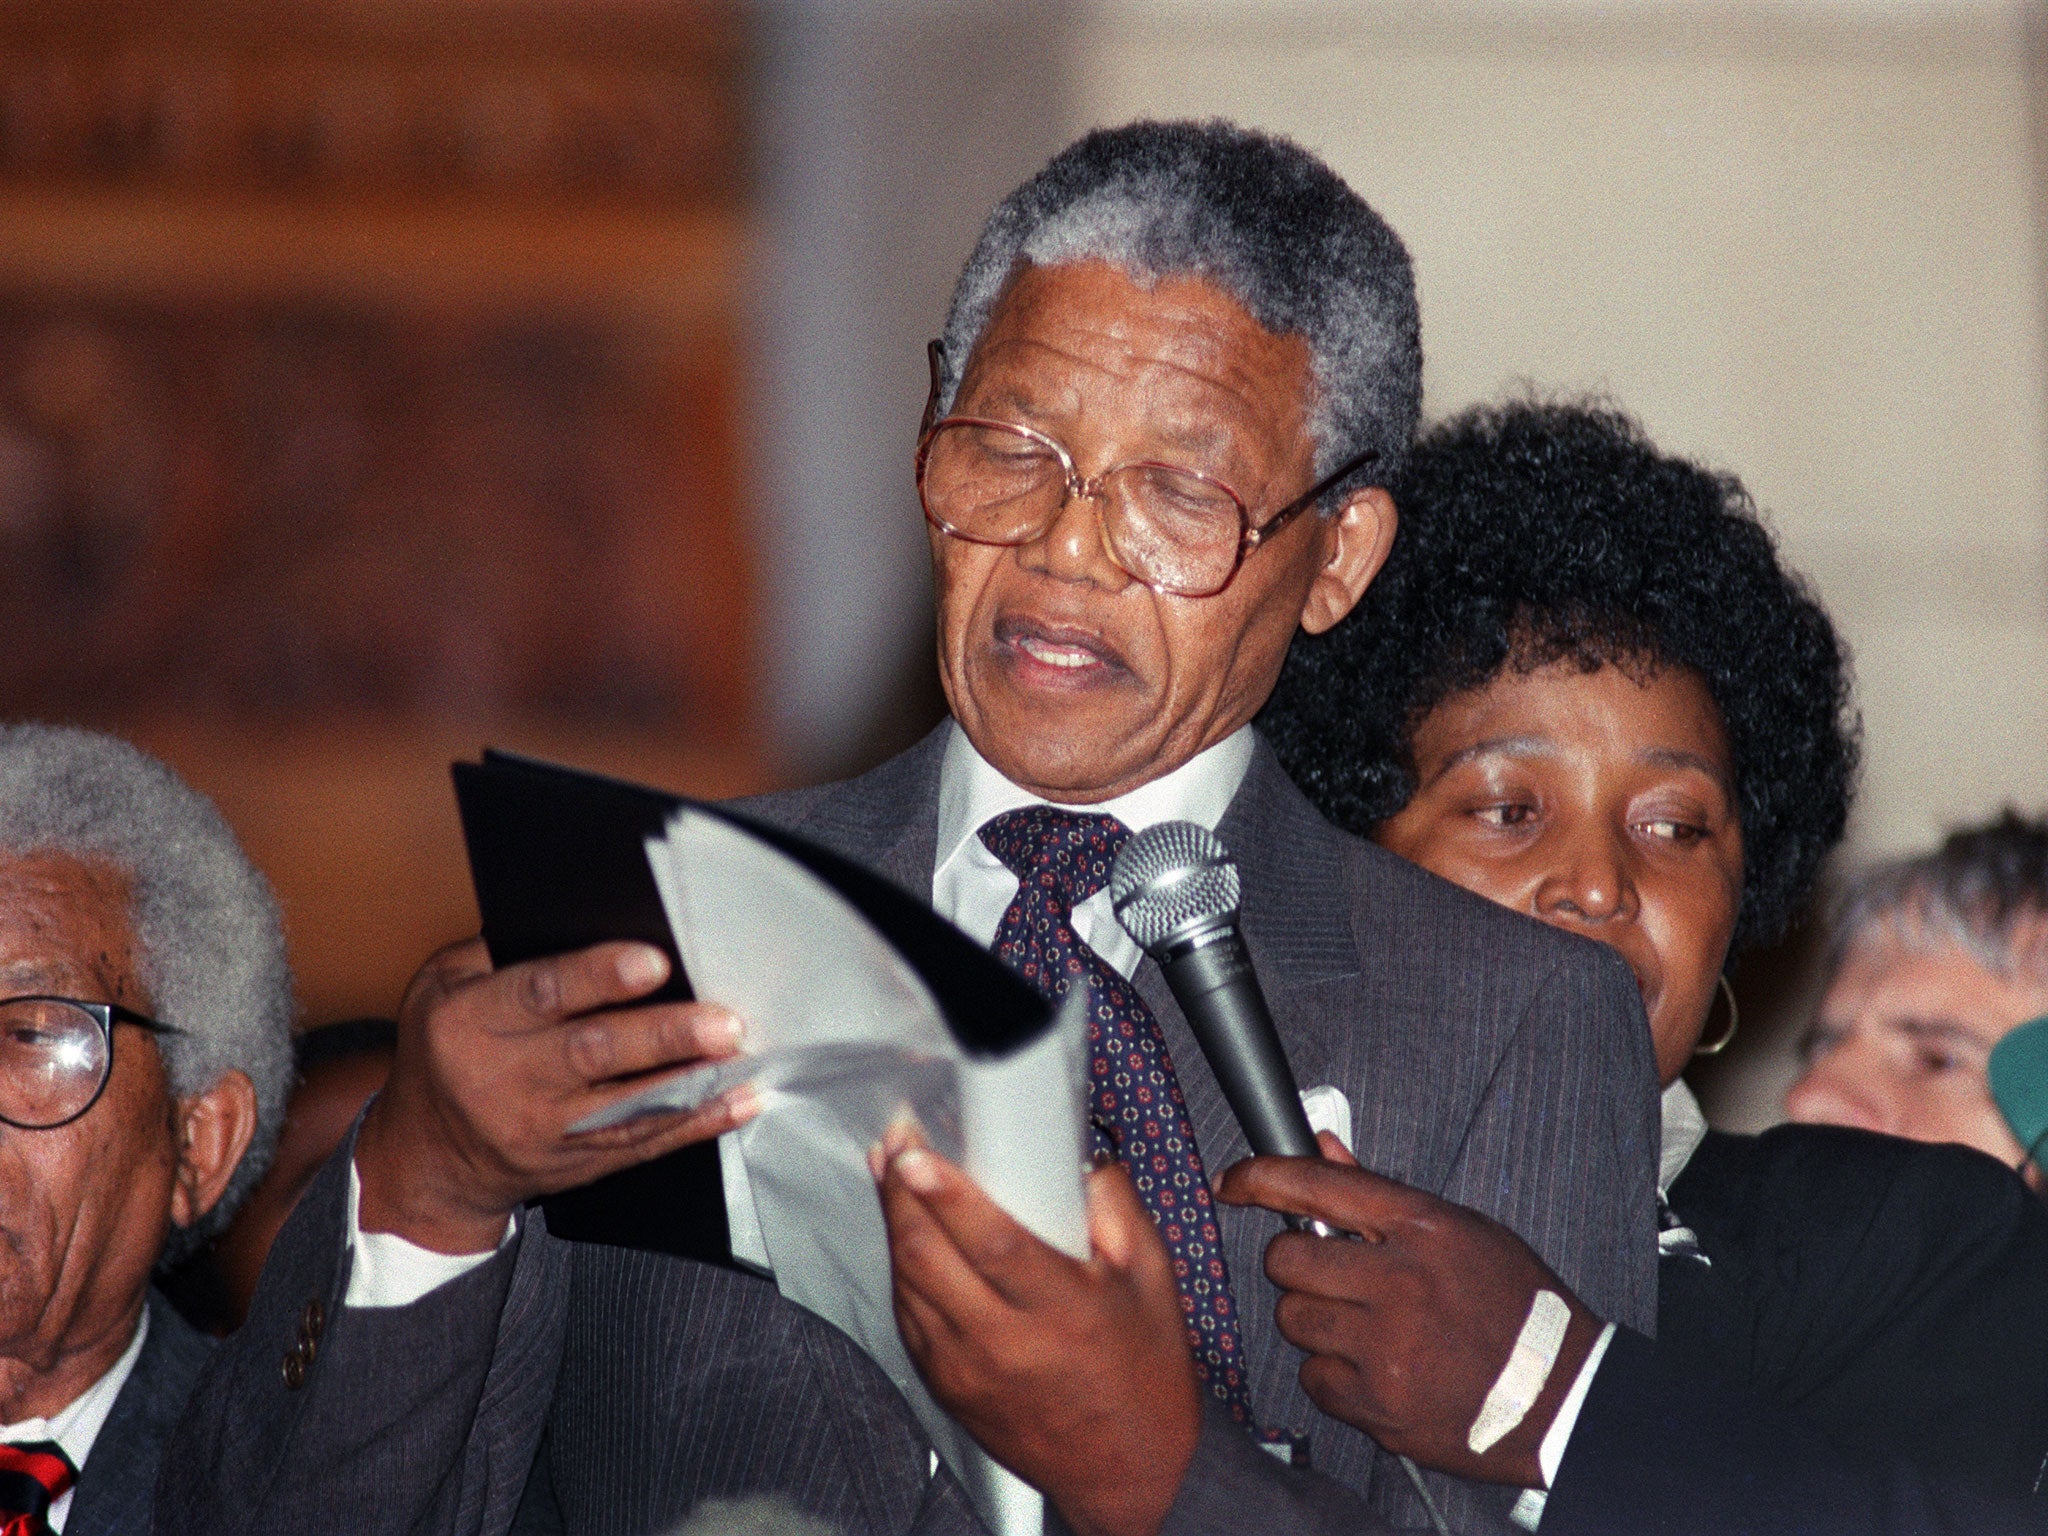 Mandela delivering his first public speech since his release from jail in Cape Town in 1990 - the same year Mandela visited Dublin